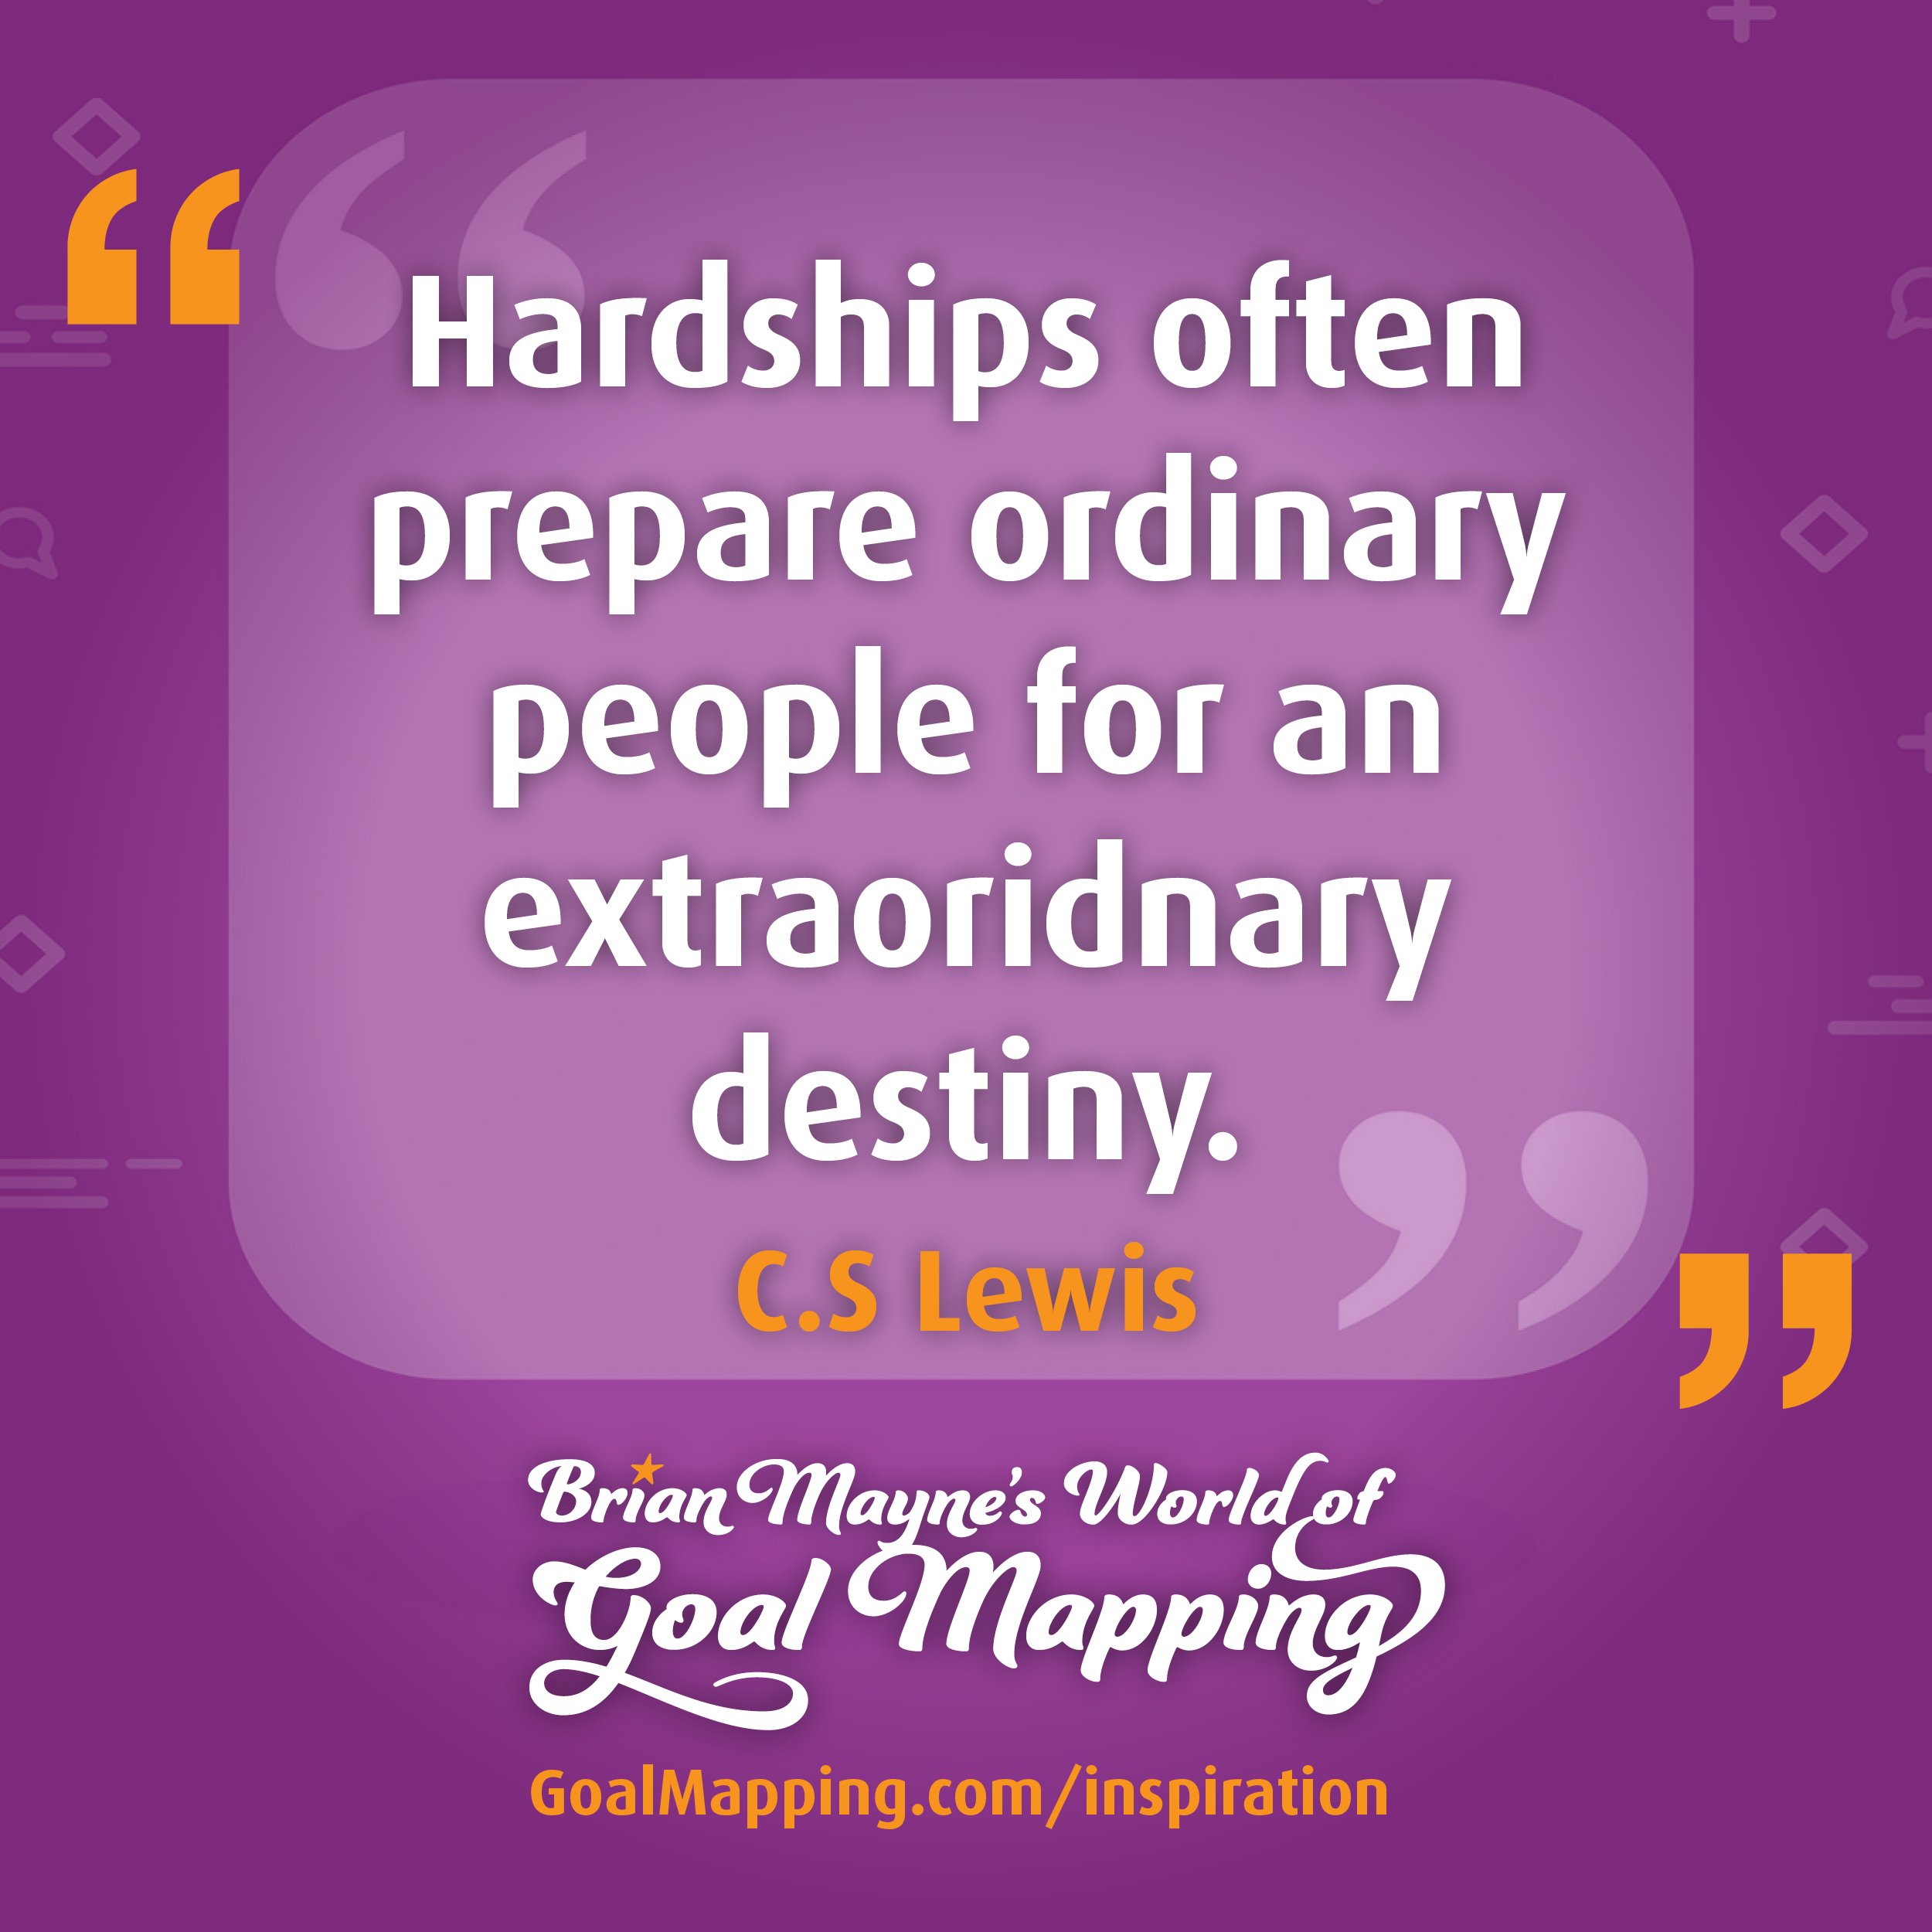 "Hardships often prepare ordinary people for an extraoridnary destiny." C.S Lewis